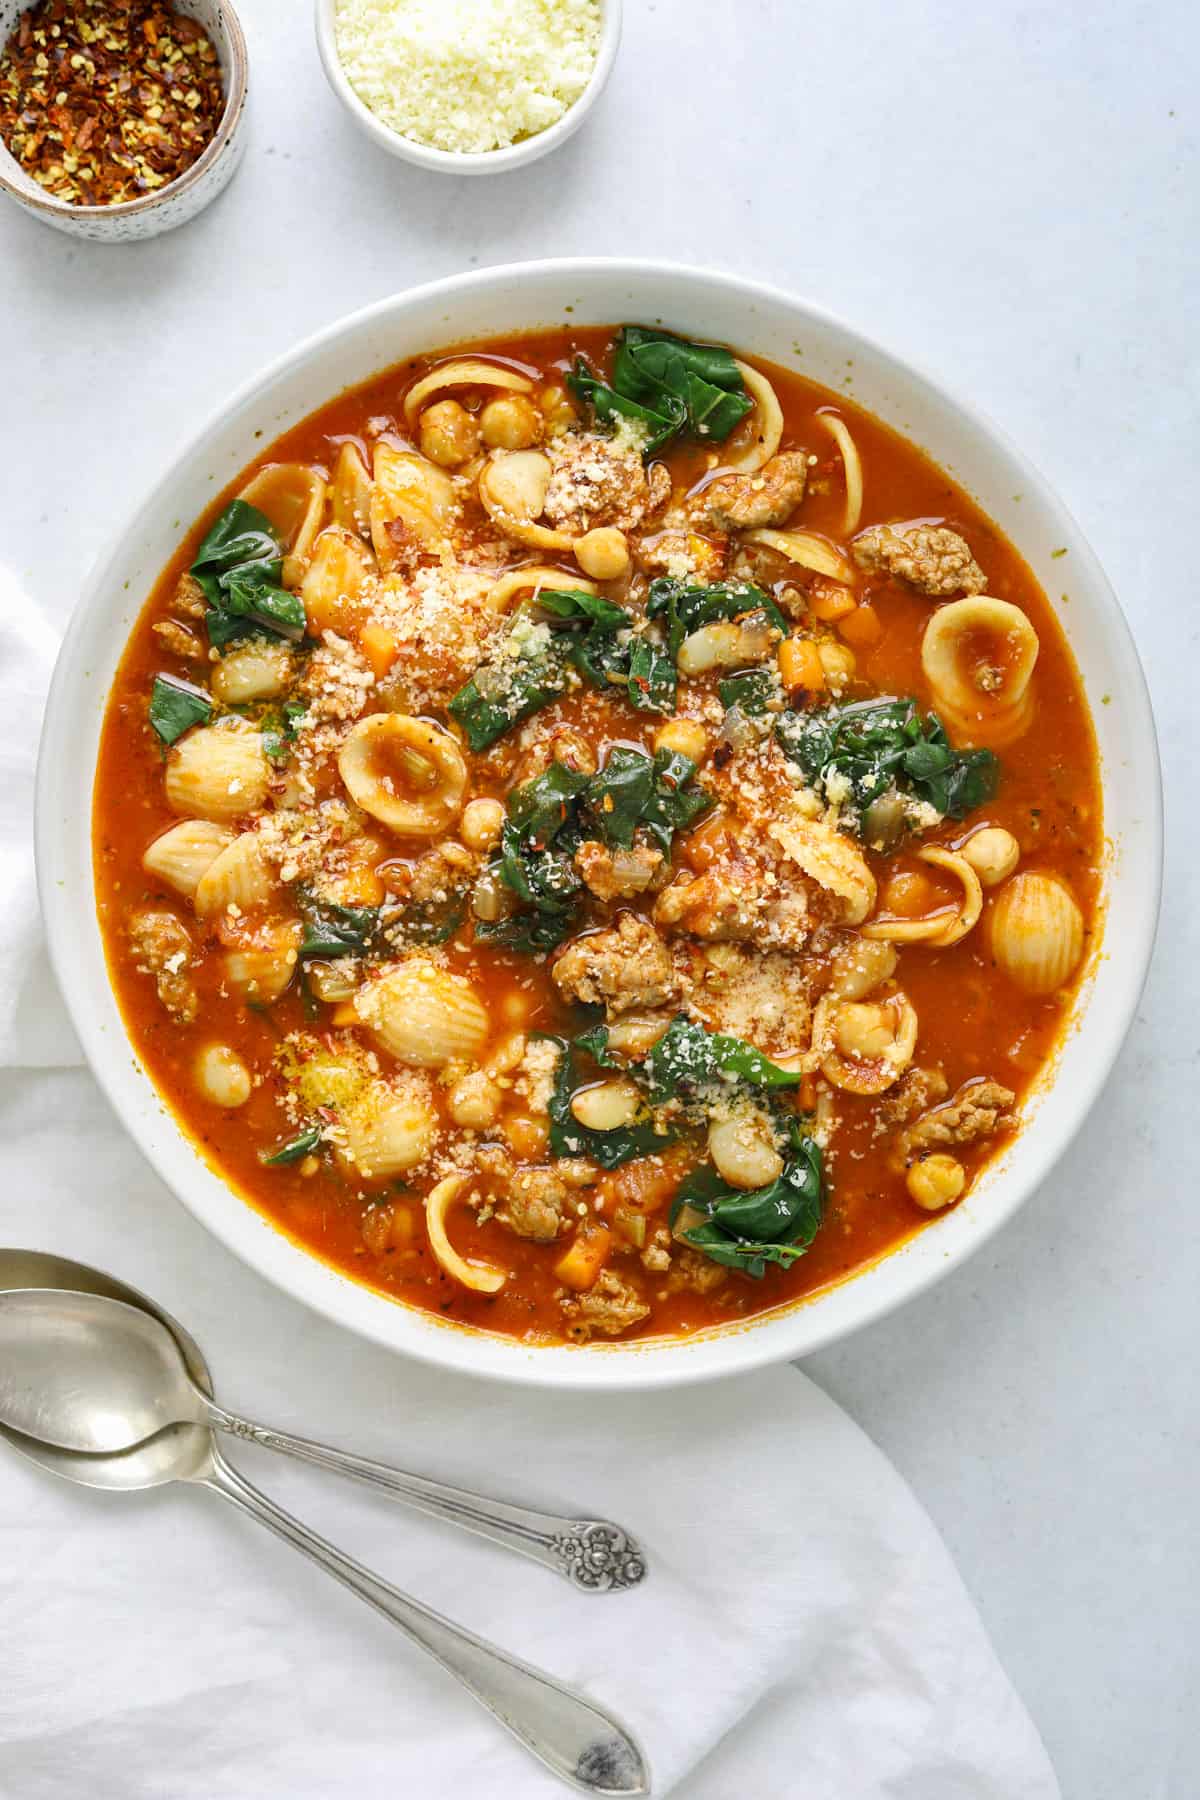 Tomato and White Bean Soup with Sausage, Swiss Chard and Parmesan Broth